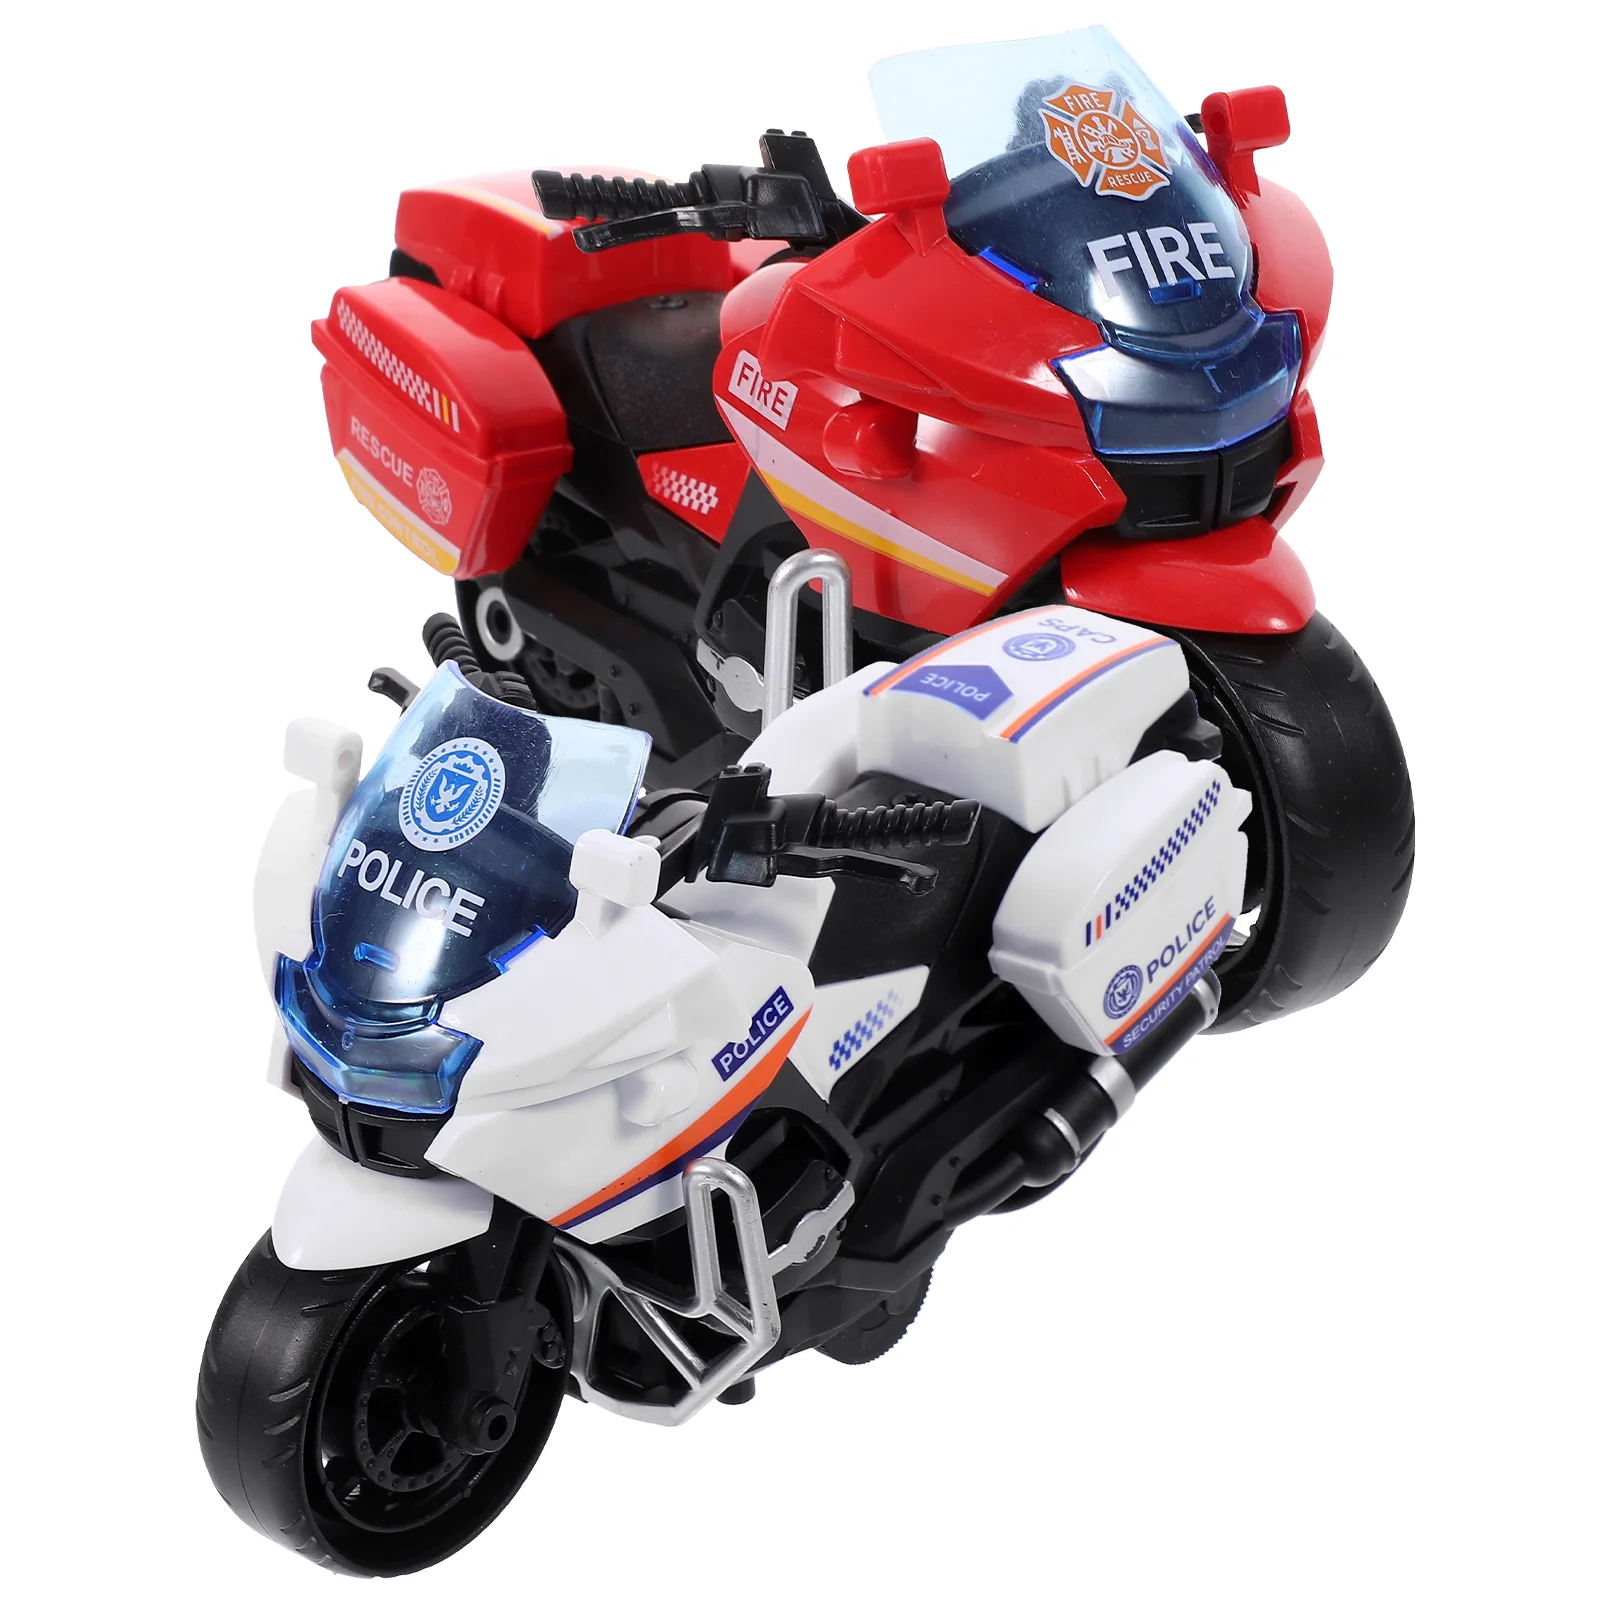 

2Pcs Plastic Motorcycle Toys Portable Pull Back Car Interesting Children Playthings